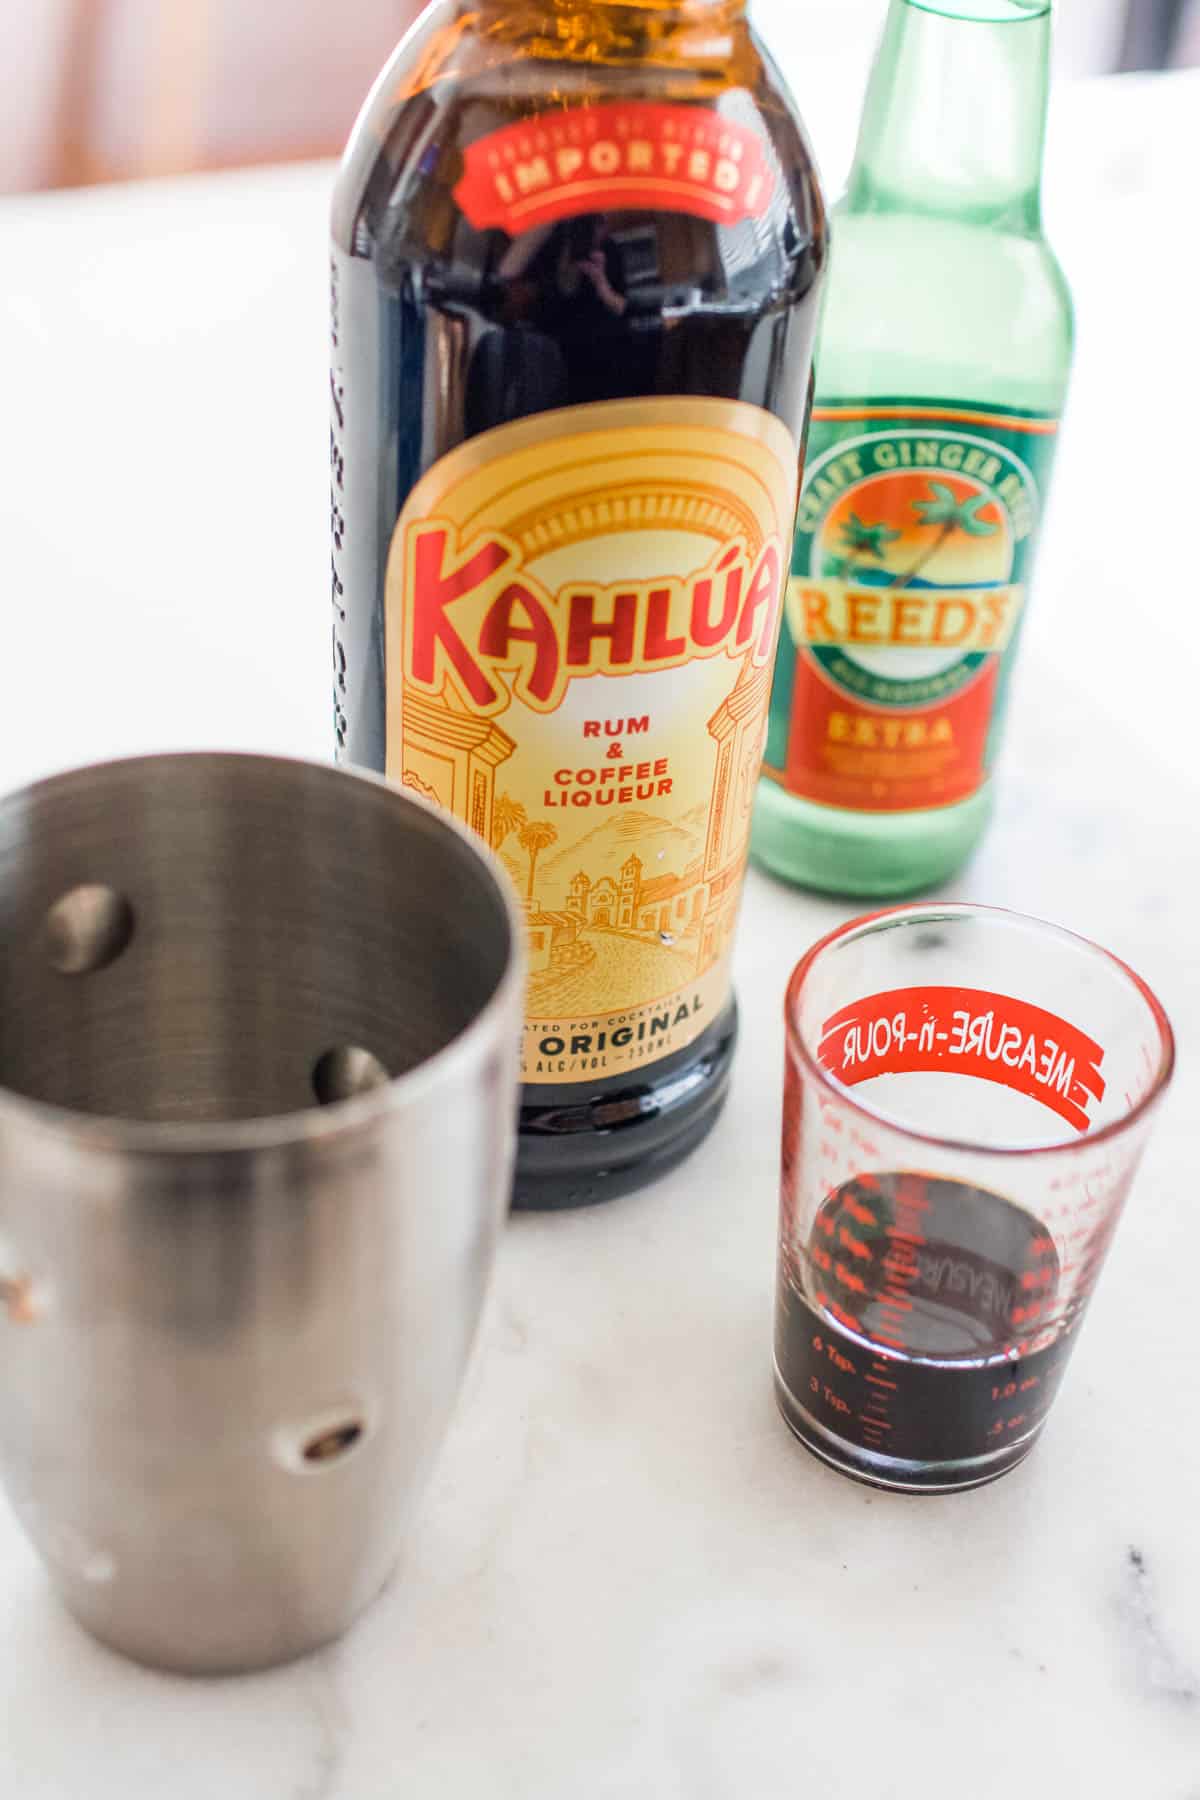 Kahula being measured next to a cocktail shaker.